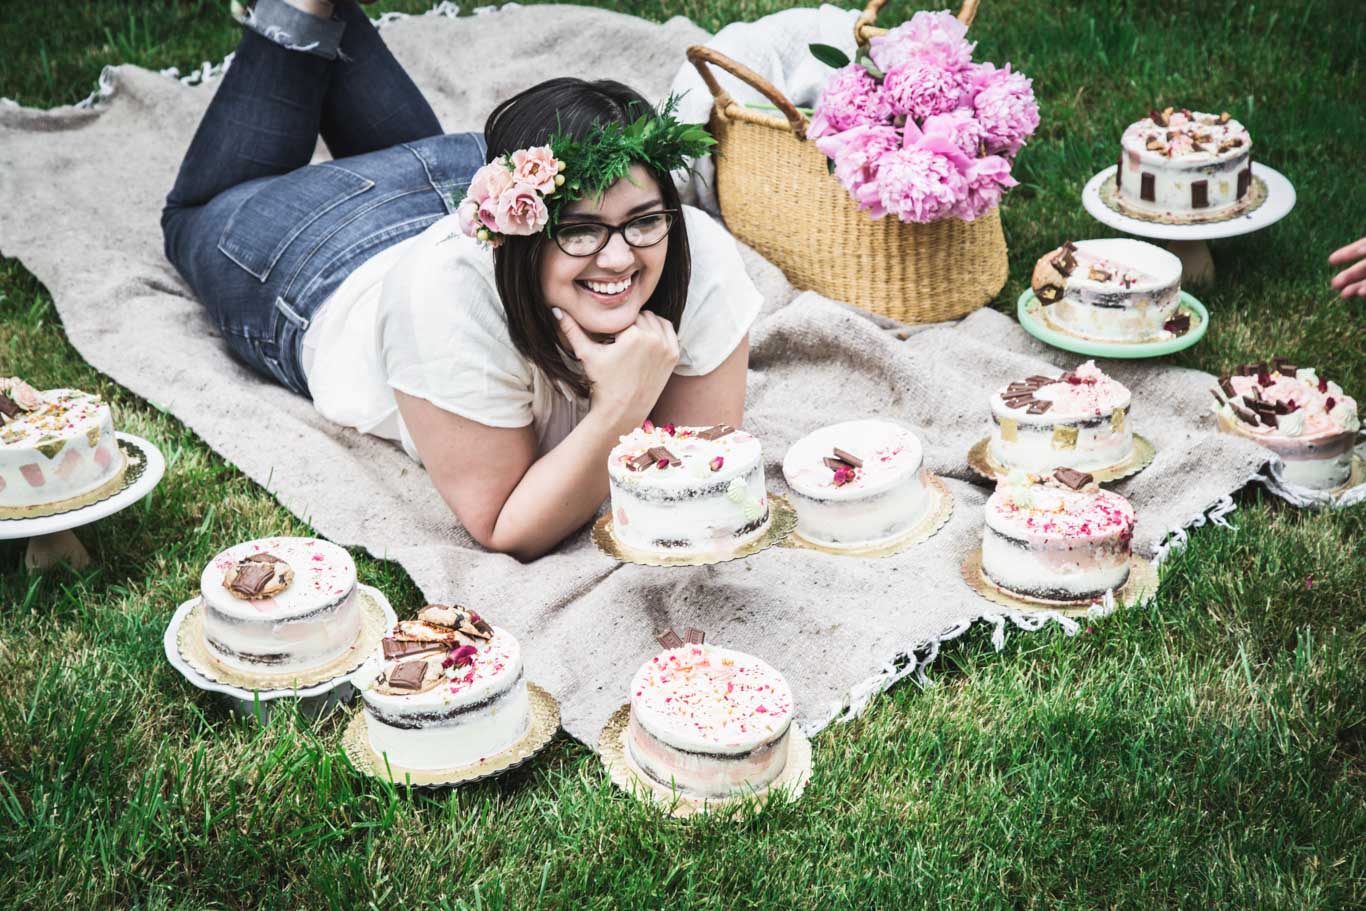 Karlee in grass surrounded by lots of decorated cakes.